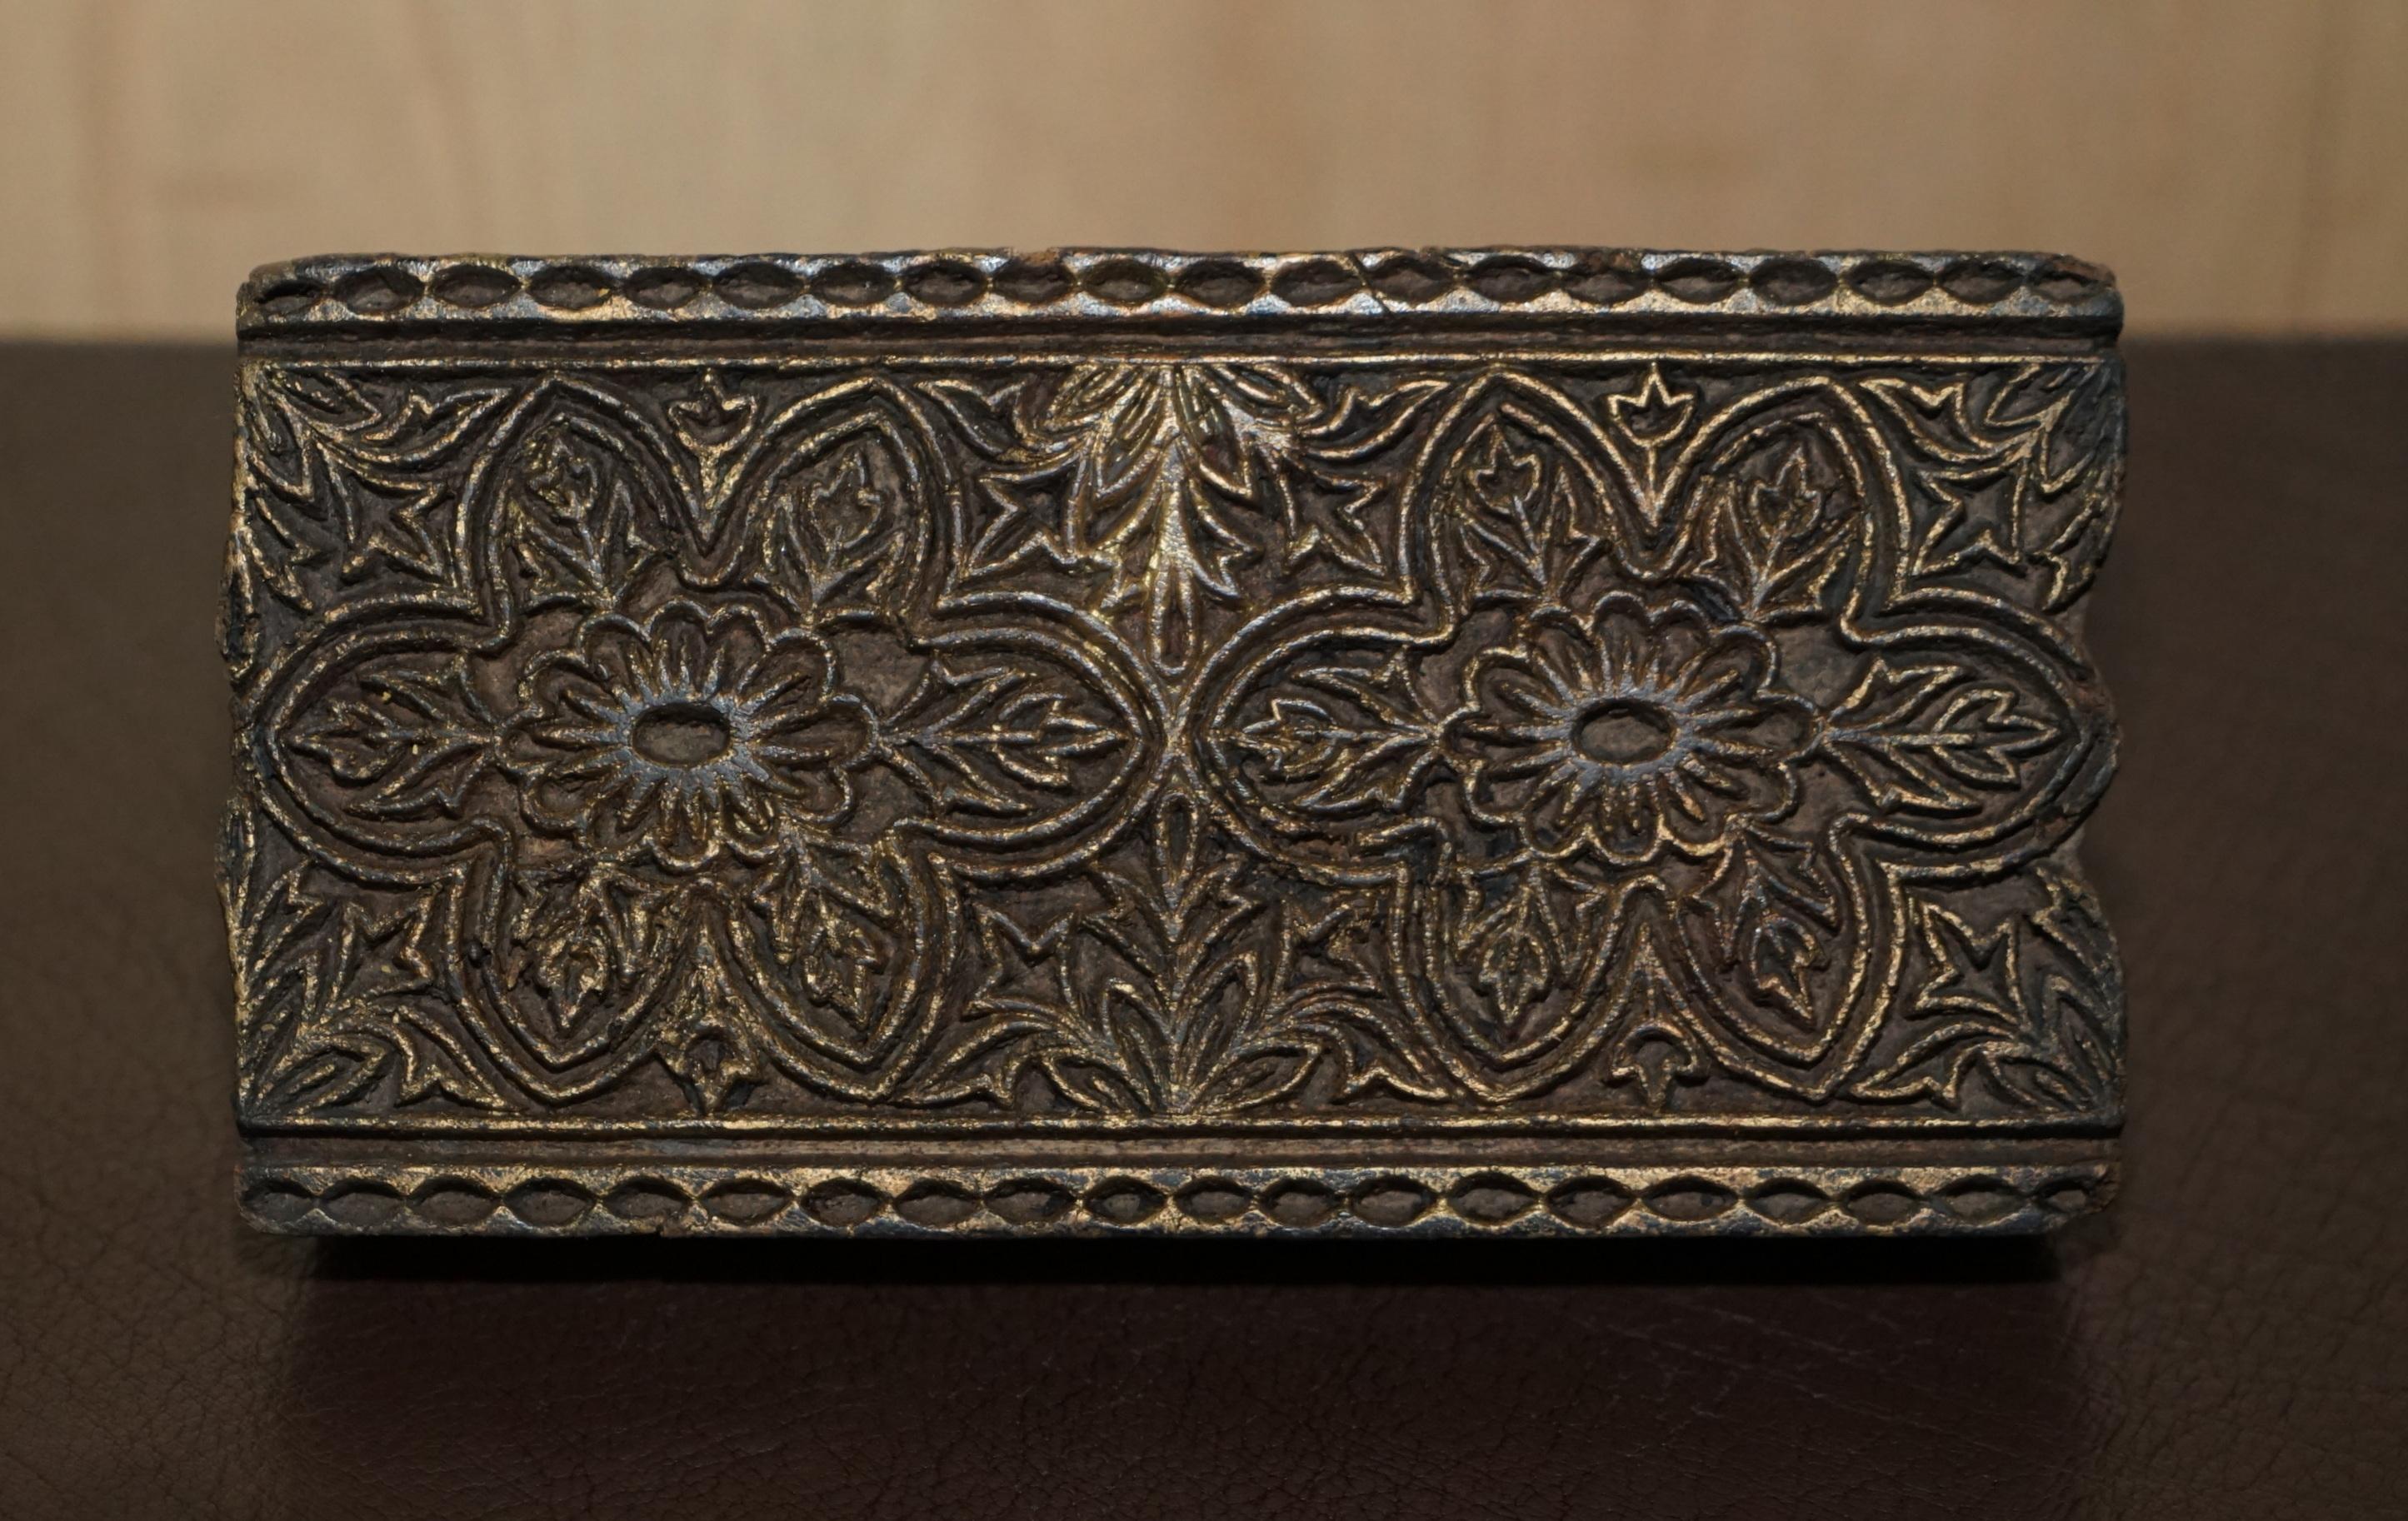 We are delighted to offer for sale this hand carved in sycamore wood printing block with double flower detail

This piece is part of a suite, I have around ten in stock, this sale is for the one piece detailed above, all other pieces are listed